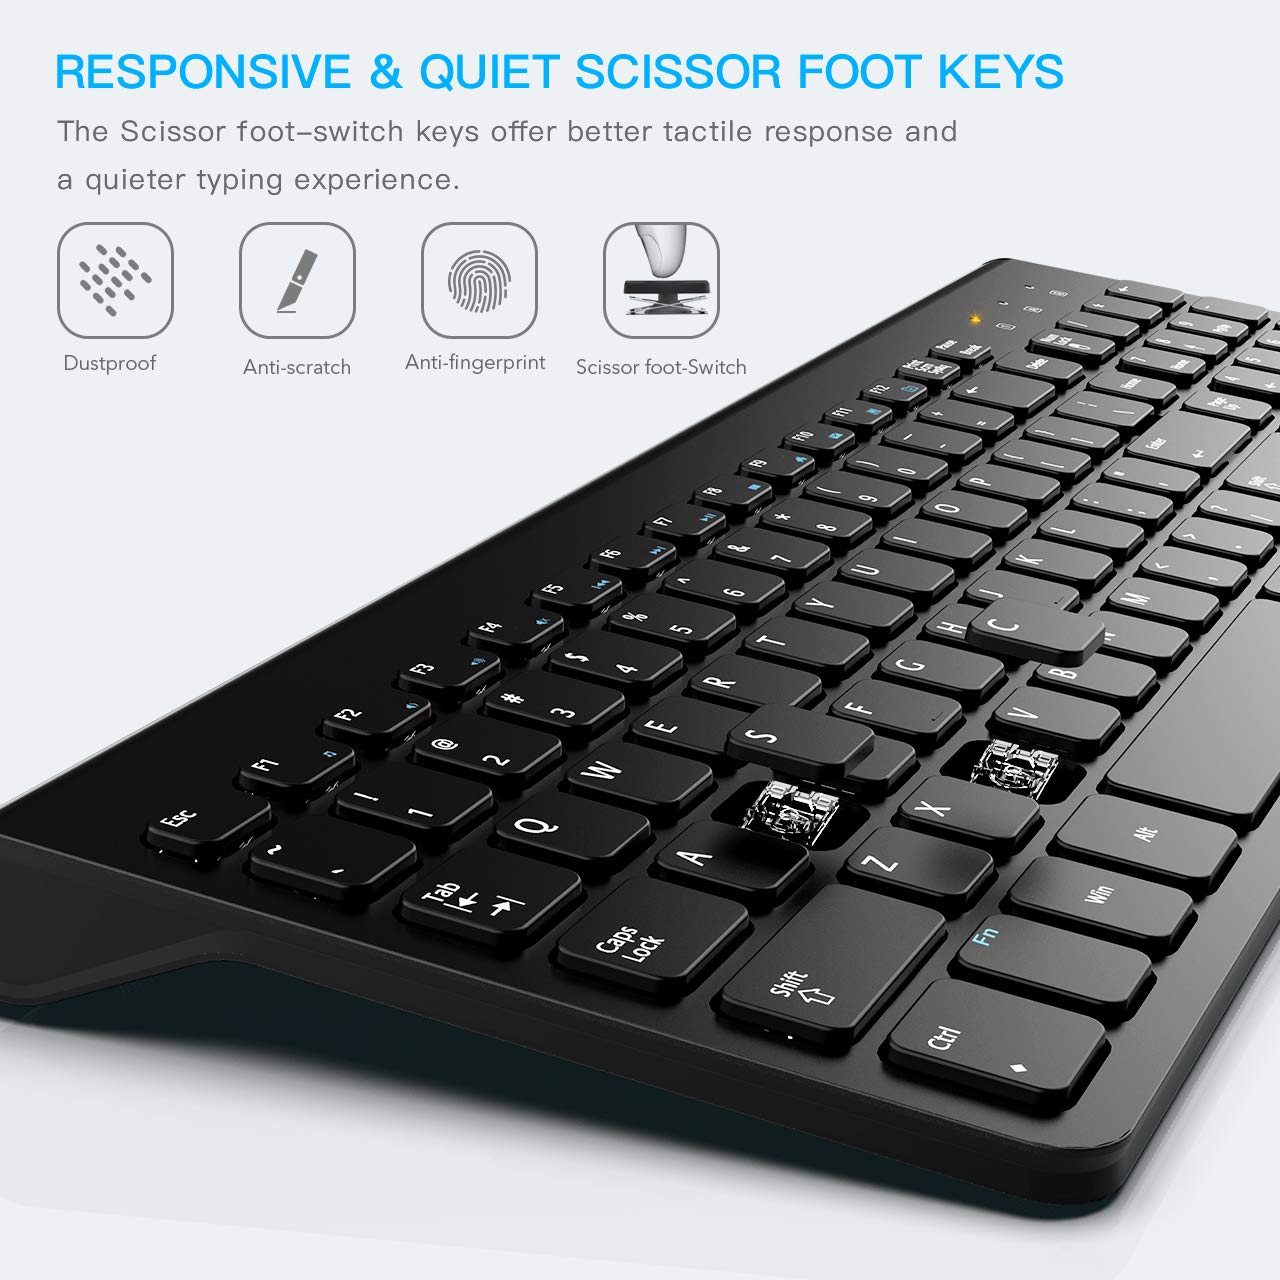 Wireless Keyboard Mouse Combo, WisFox 2.4GHz Slim Full Size Wireless Keyboard and Mouse Set with Number Pad and Nano Receiver for PC Laptop Windows, Quiet and Ergonomic (Black)